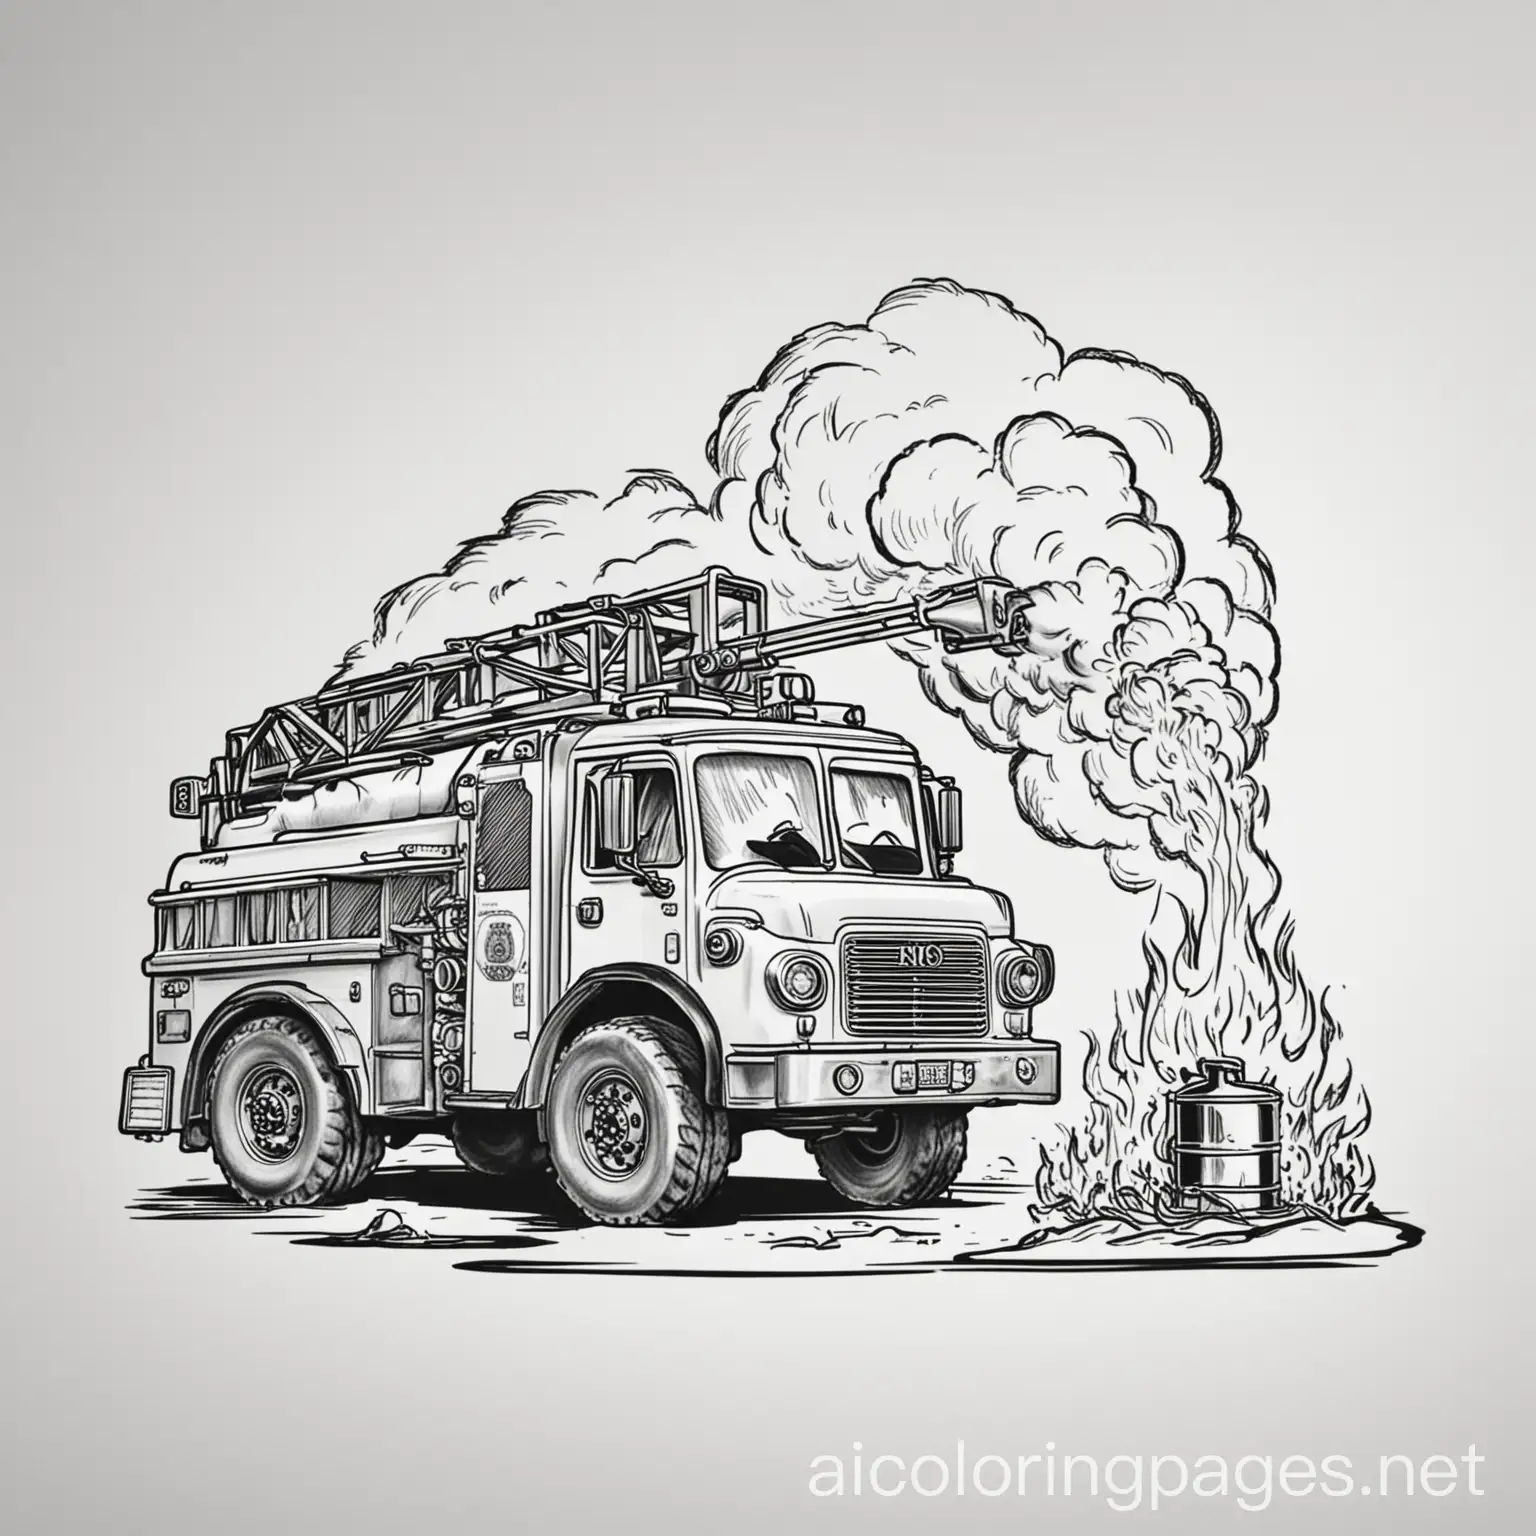 Oil can on fire with a fire truck next to it, Coloring Page, black and white, line art, white background, Simplicity, Ample White Space. The background of the coloring page is plain white to make it easy for young children to color within the lines. The outlines of all the subjects are easy to distinguish, making it simple for kids to color without too much difficulty